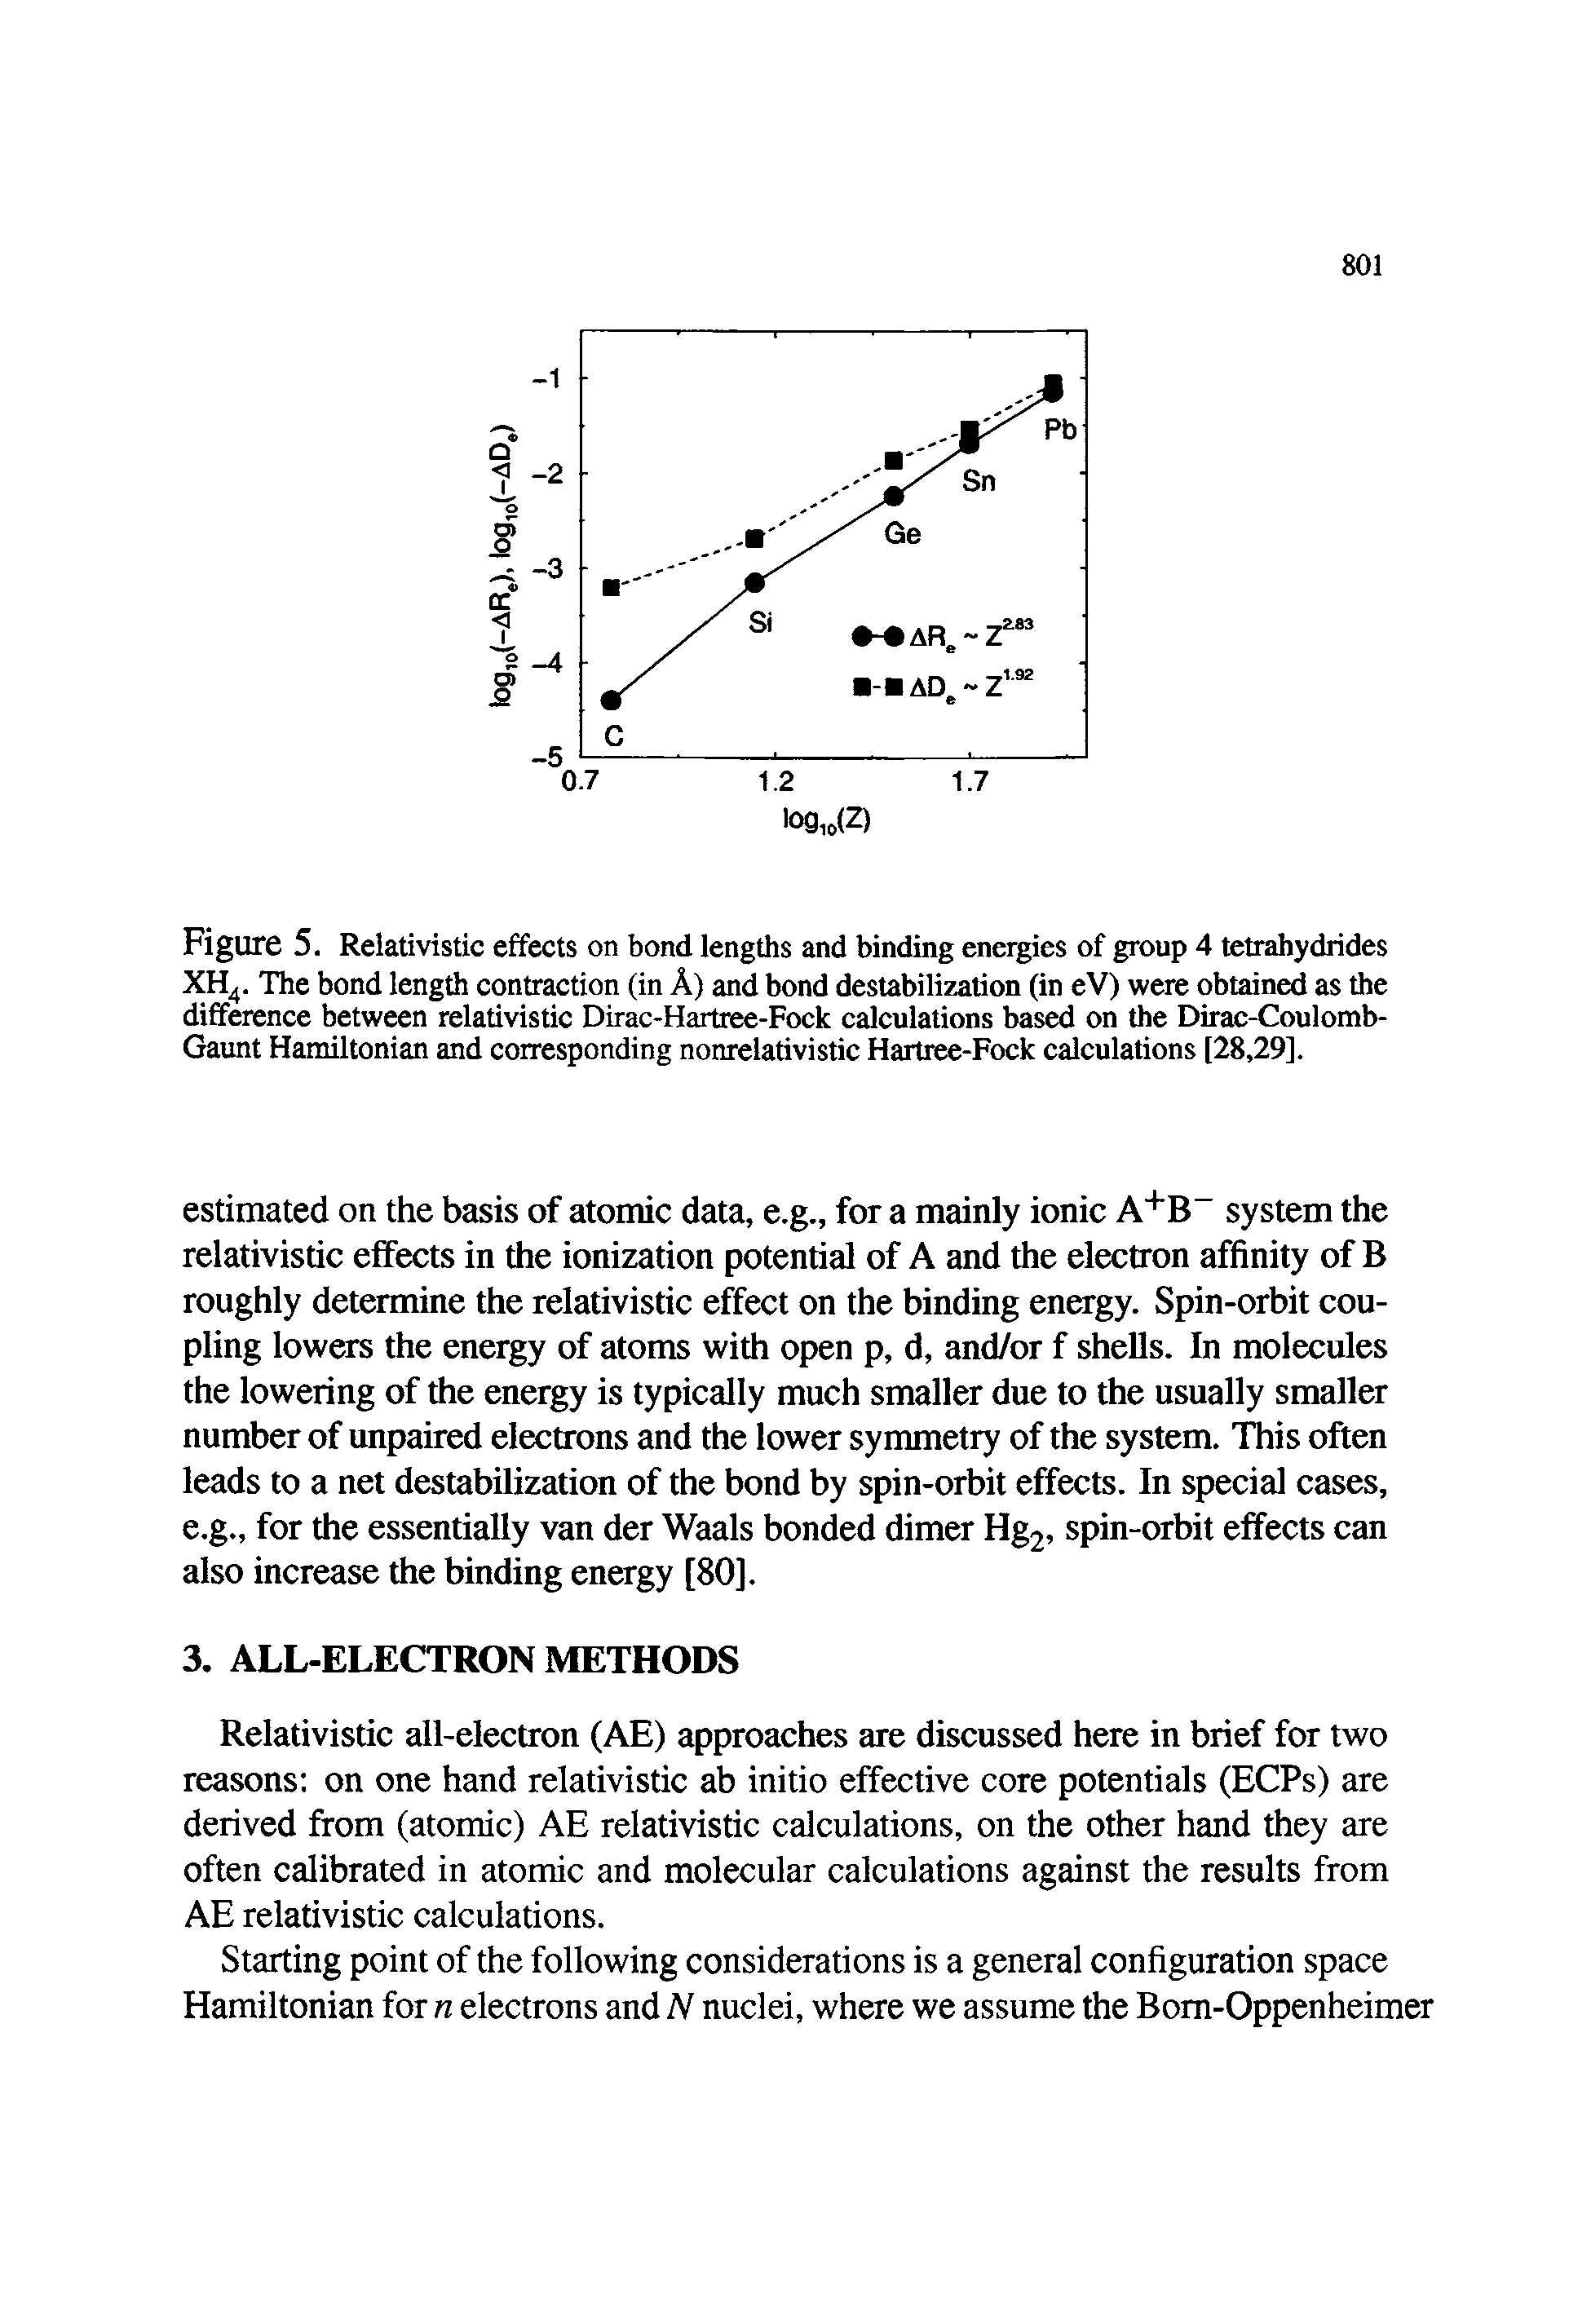 Figure 5. Relativistic effects on bond lengths and binding energies of group 4 tctrahydrides XH. The bond length contraction (in A) and bond destabilization (in eV) were obtained as the difference between relativistic Dirac-Hartree-Fock calculations based on the Dirac-Coulomb-Gaunt Hamiltonian and corresponding nonrelativistic Hartree-Fock calculations [28,29].